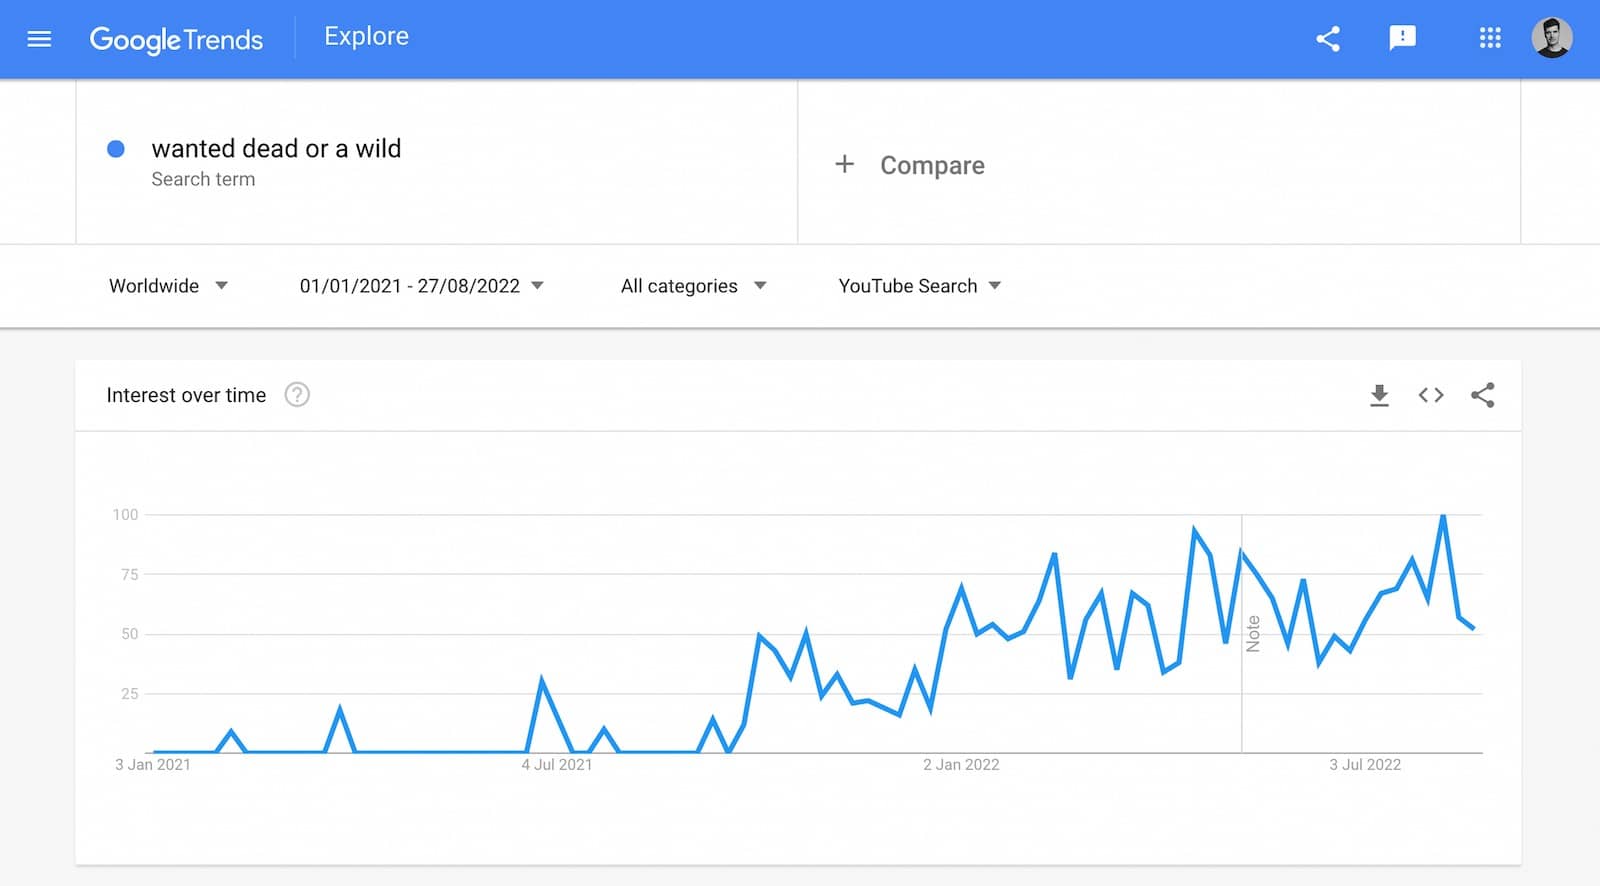 Google Trends Youtube – Wanted Dead or a Wild